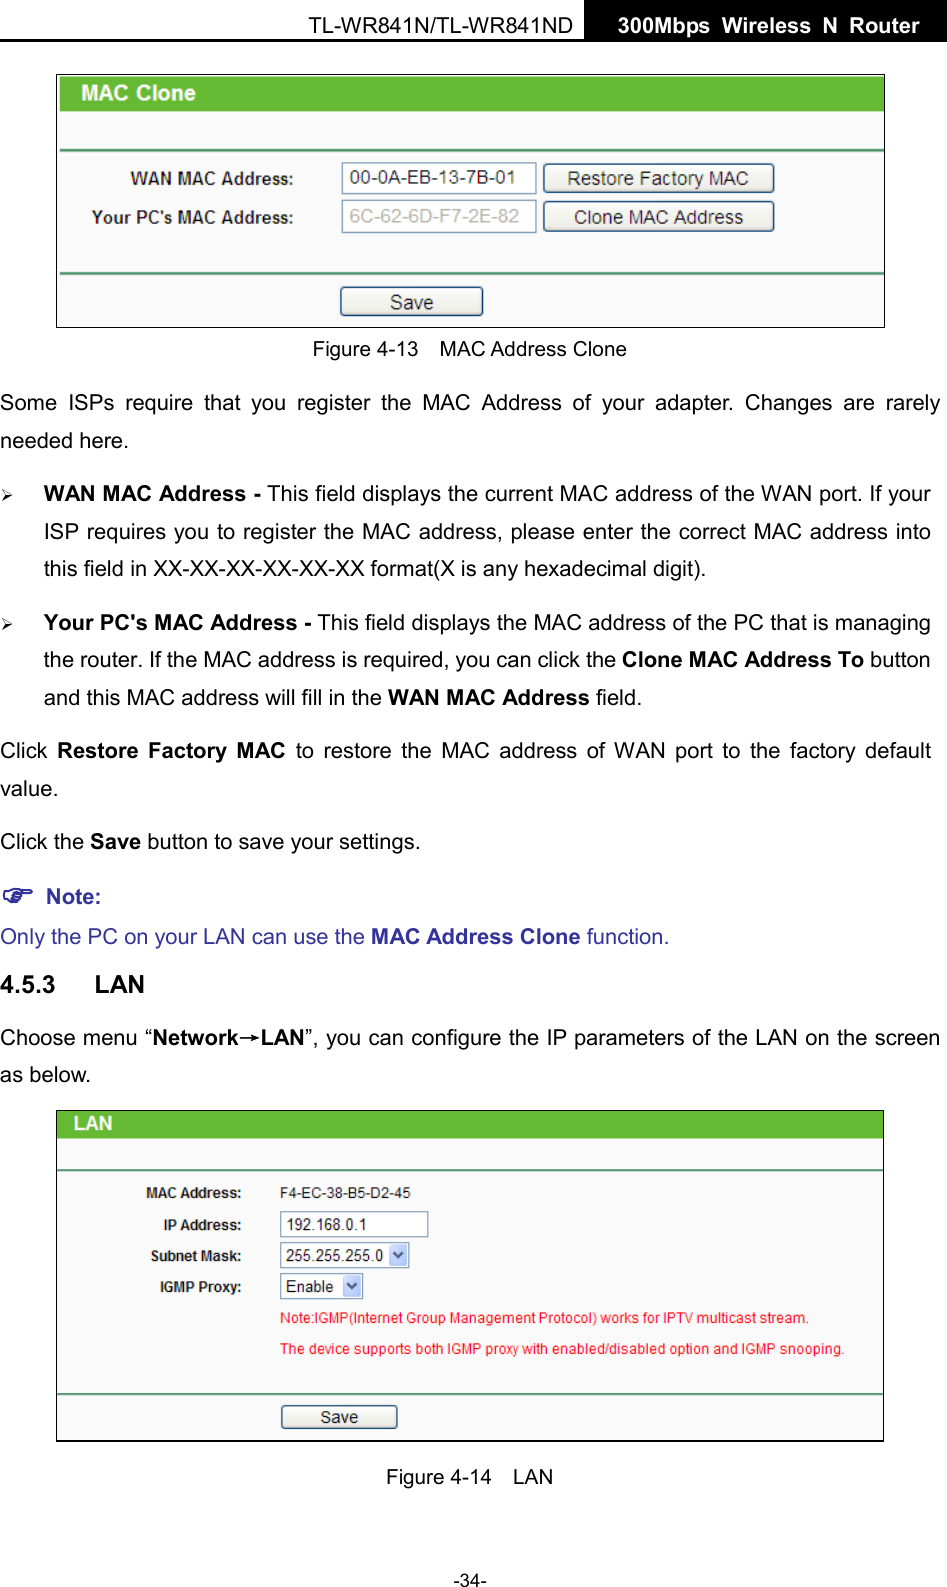  TL-WR841N/TL-WR841ND  300Mbps Wireless N  Router     Figure 4-13  MAC Address Clone Some ISPs require that you register the MAC Address of your adapter.  Changes are rarely needed here.  WAN MAC Address - This field displays the current MAC address of the WAN port. If your ISP requires you to register the MAC address, please enter the correct MAC address into this field in XX-XX-XX-XX-XX-XX format(X is any hexadecimal digit).    Your PC&apos;s MAC Address - This field displays the MAC address of the PC that is managing the router. If the MAC address is required, you can click the Clone MAC Address To button and this MAC address will fill in the WAN MAC Address field. Click  Restore Factory MAC to restore the MAC address of WAN port to the factory default value. Click the Save button to save your settings.  Note:   Only the PC on your LAN can use the MAC Address Clone function. 4.5.3 LAN Choose menu “Network→LAN”, you can configure the IP parameters of the LAN on the screen as below.  Figure 4-14  LAN -34- 